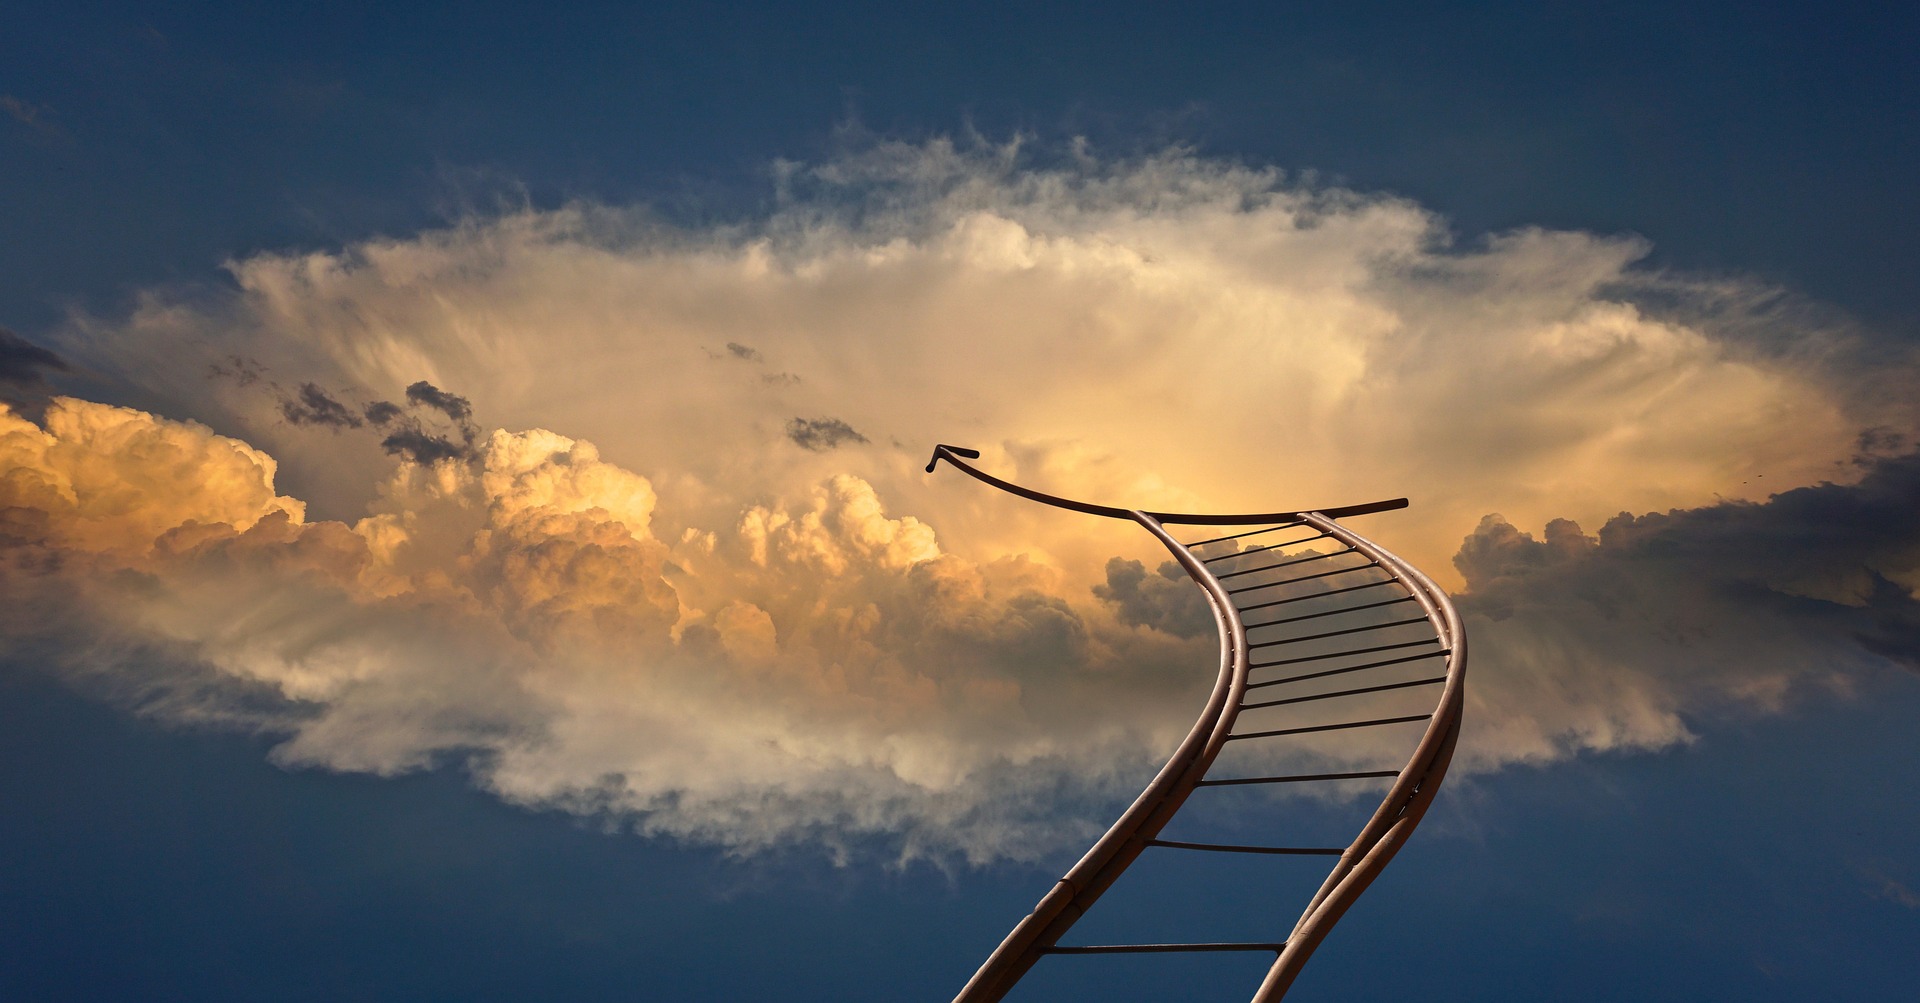 Make sure your ladder is leading you into Heaven